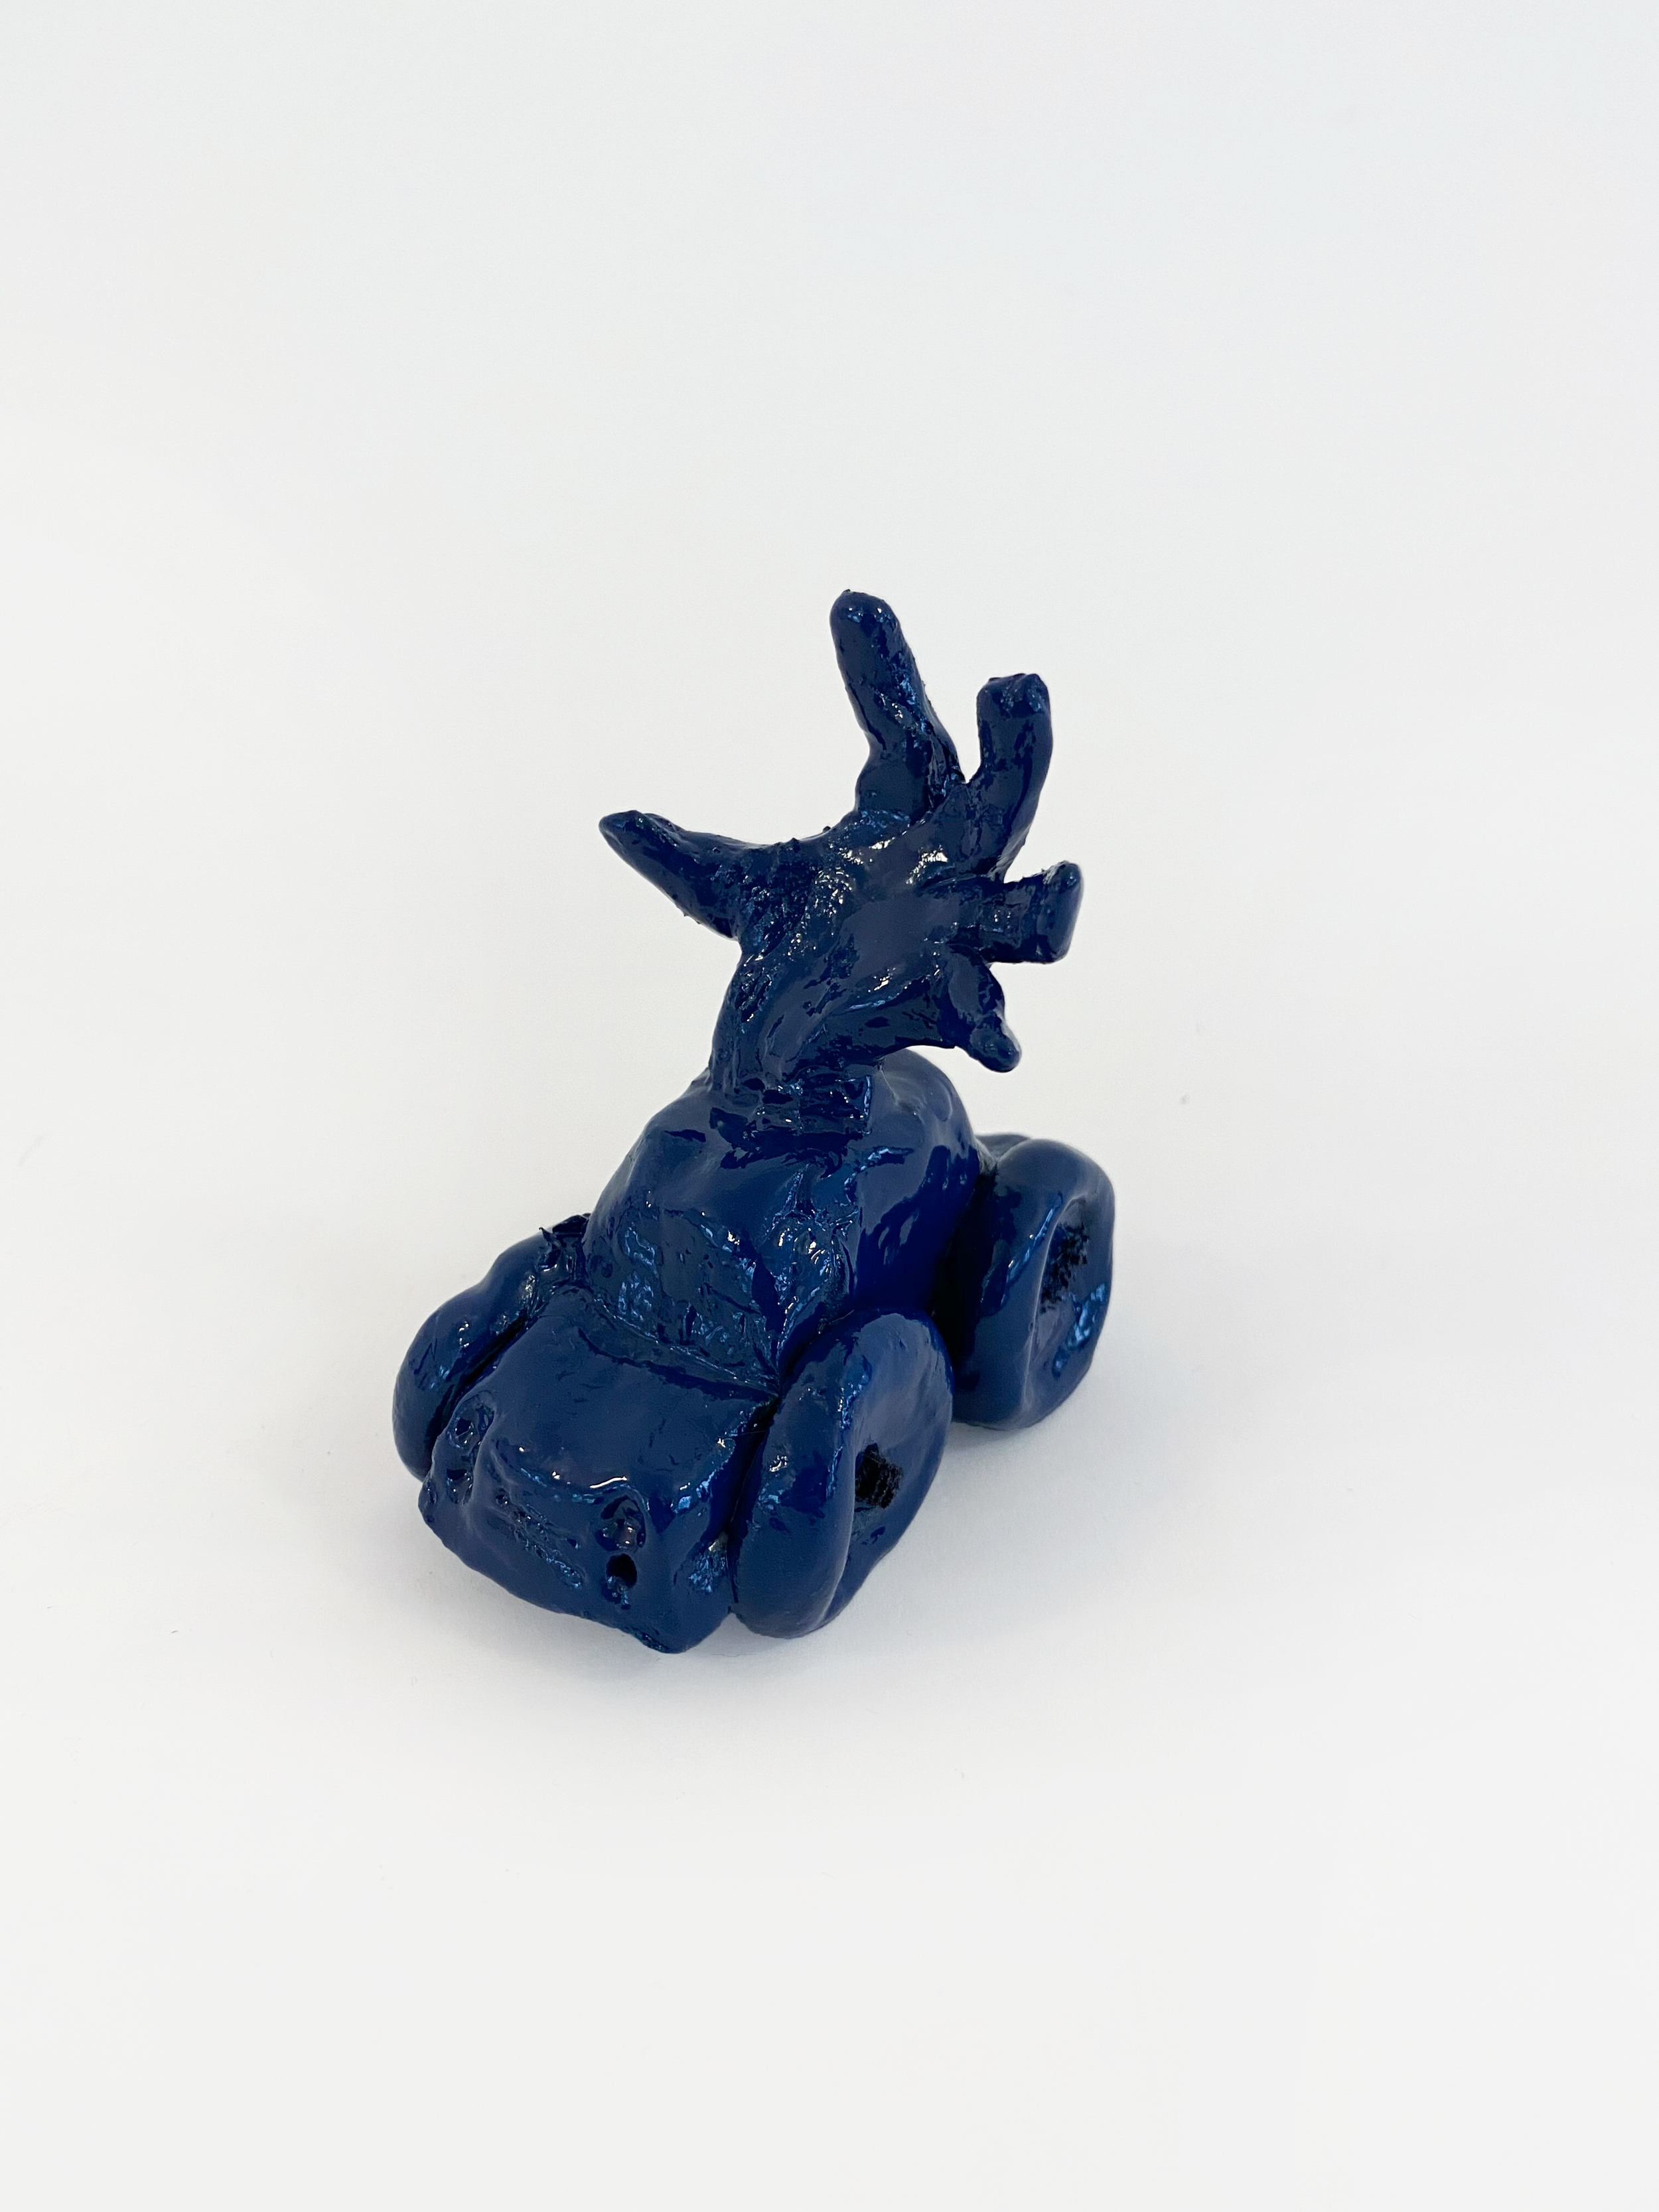   Blue Car with Hand , 2020, enamel on air-drying clay, 4” x 5” x 2.5” 